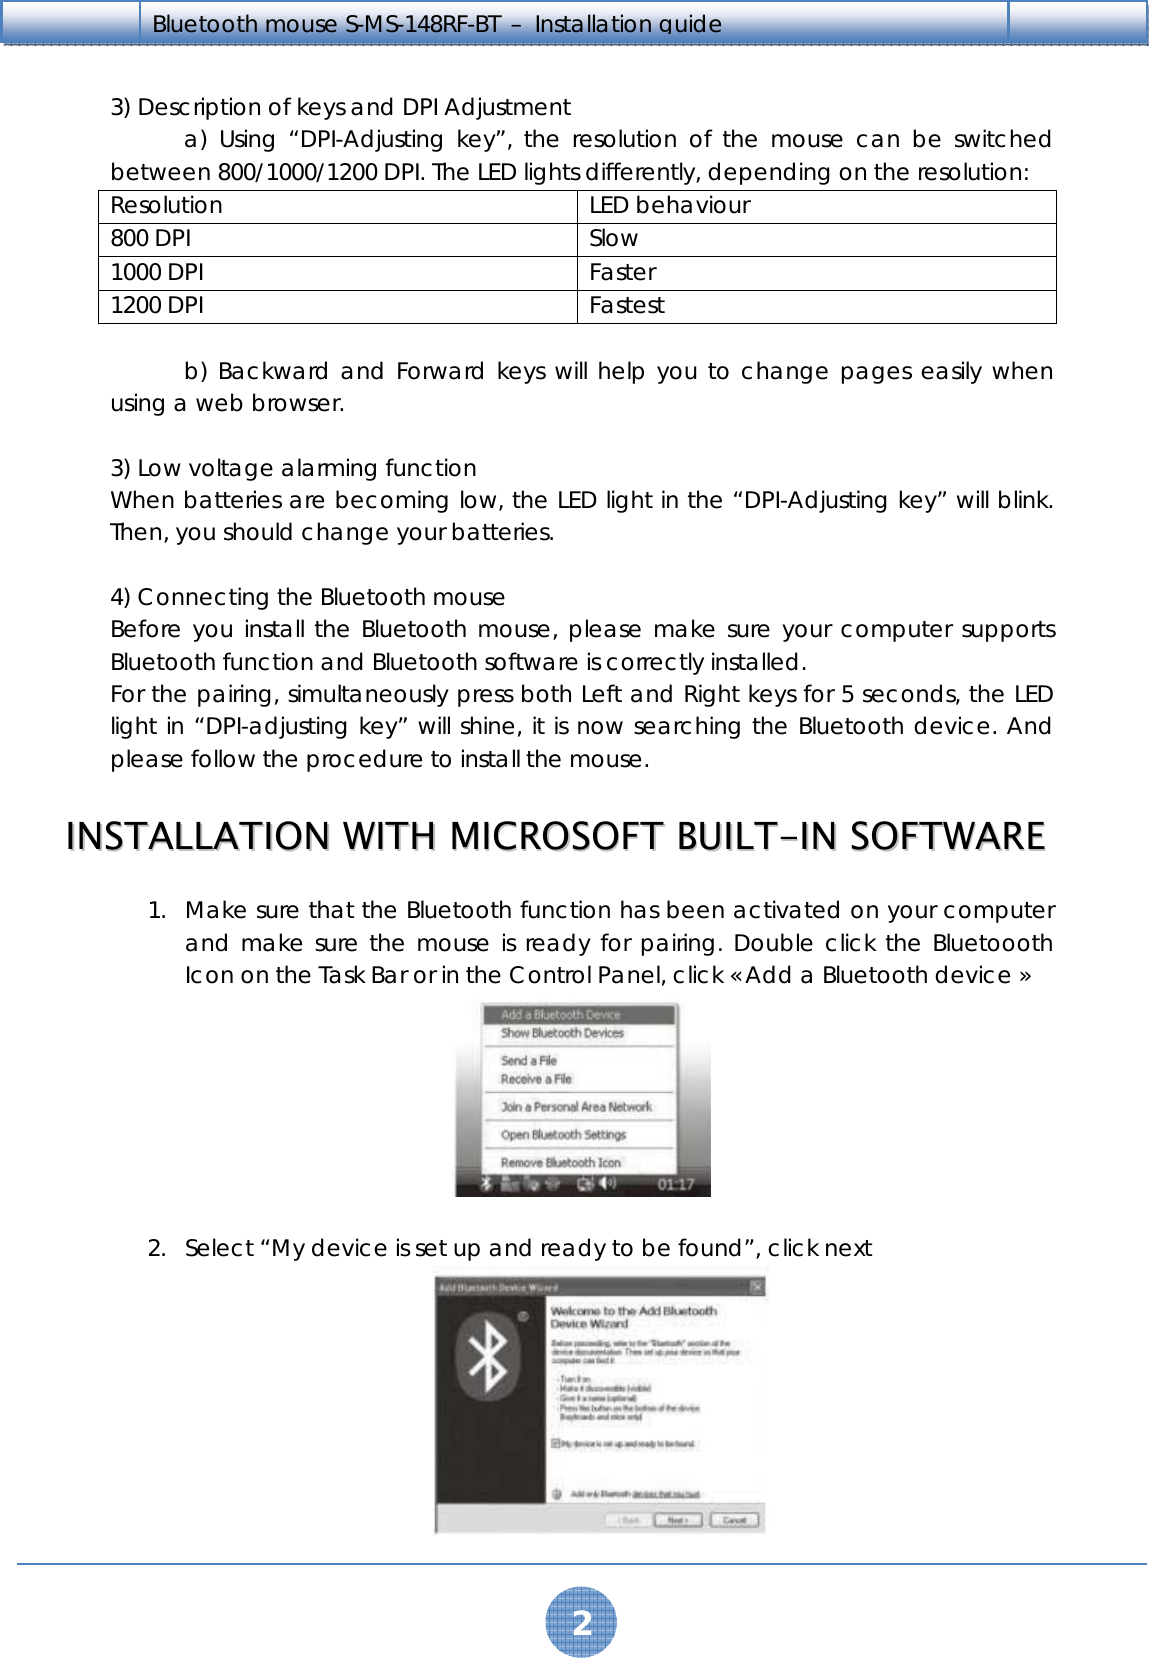   2 Bluetooth mouse S-MS-148RF-BT  –  Installation guide    3) Description of keys and DPI Adjustment   a) Using “DPI-Adjusting key”, the resolution of the mouse can be switched between 800/1000/1200 DPI. The LED lights differently, depending on the resolution: Resolution LED behaviour 800 DPI  Slow 1000 DPI  Faster 1200 DPI  Fastest     b) Backward and Forward keys will help you to change pages easily when using a web browser.  3) Low voltage alarming function When batteries are becoming low, the LED light in the “DPI-Adjusting key” will blink. Then, you should change your batteries.  4) Connecting the Bluetooth mouse Before you install the Bluetooth mouse, please make sure your computer supports Bluetooth function and Bluetooth software is correctly installed. For the pairing, simultaneously press both Left and Right keys for 5 seconds, the LED light in “DPI-adjusting key” will shine, it is now searching the Bluetooth device. And please follow the procedure to install the mouse.  IINNSSTTAALLLLAATTIIOONN  WWIITTHH  MMIICCRROOSSOOFFTT  BBUUIILLTT--IINN  SSOOFFTTWWAARREE  1. Make sure that the Bluetooth function has been activated on your computer and make sure the mouse is ready for pairing. Double click the Bluetoooth Icon on the Task Bar or in the Control Panel, click « Add a Bluetooth device »   2. Select “My device is set up and ready to be found”, click next  